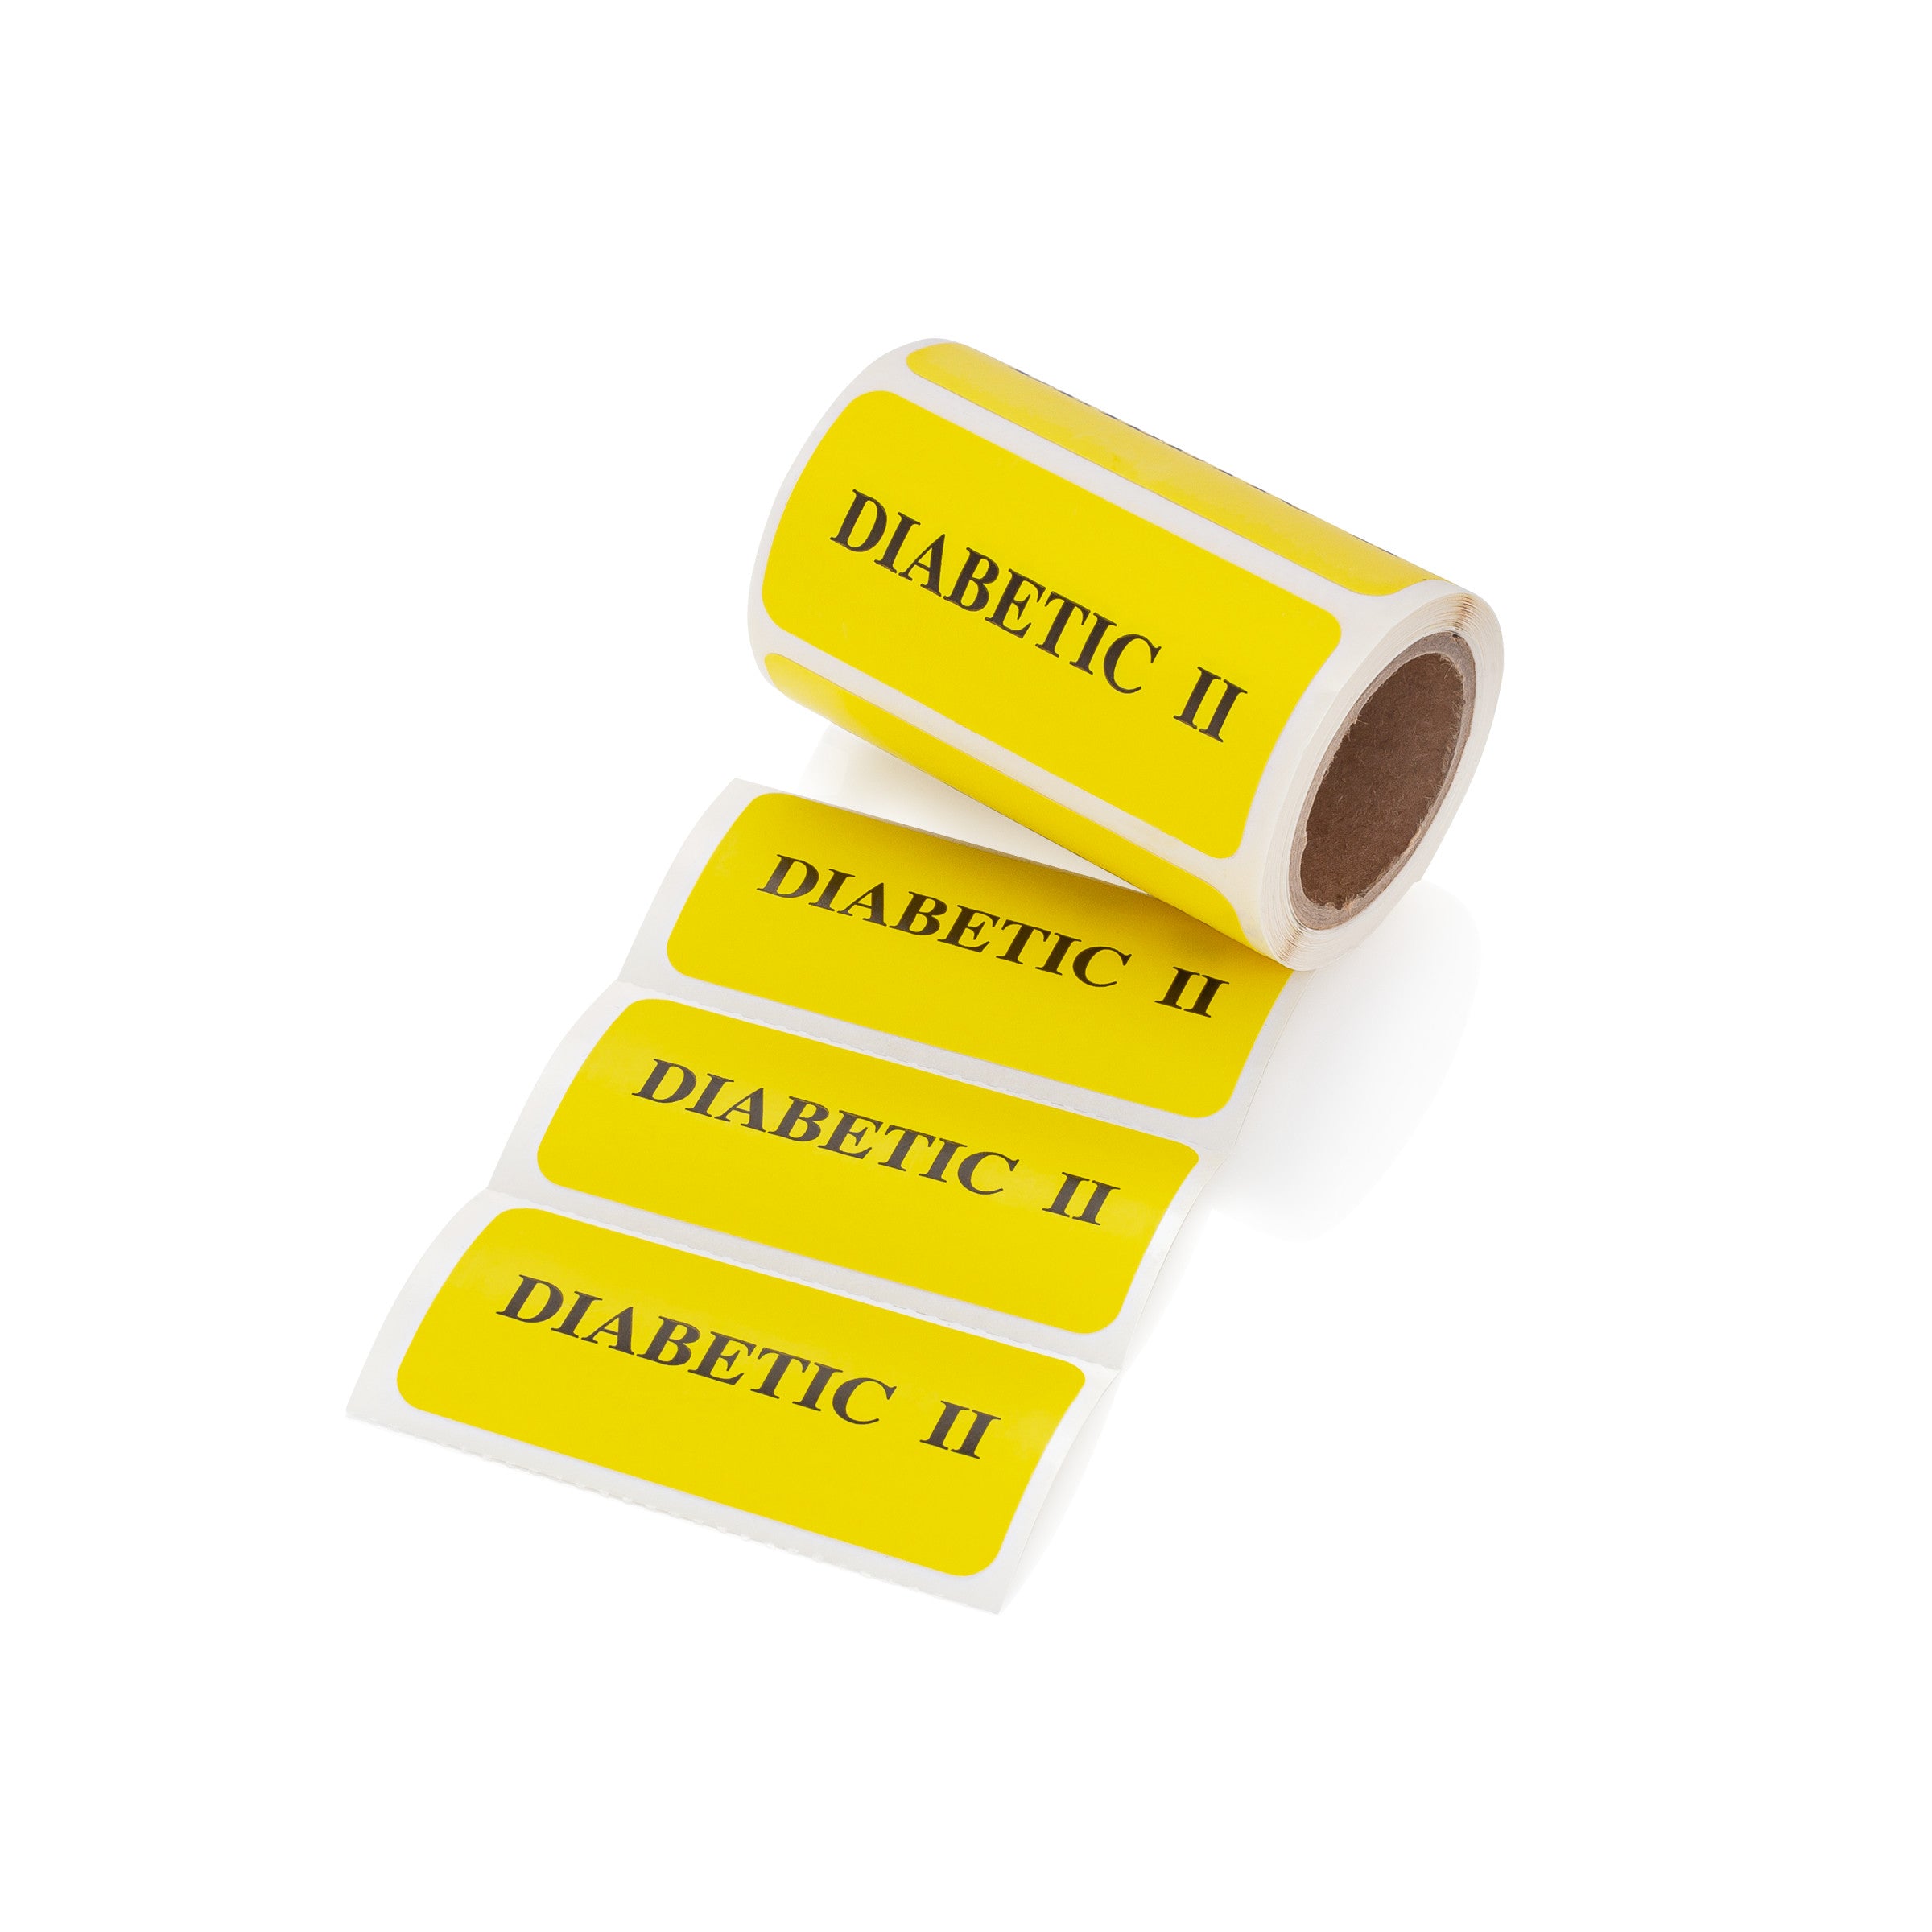 Diabetic II Alert and Instruction Labels, Yellow, W2.125" x H1" (Roll of 100)